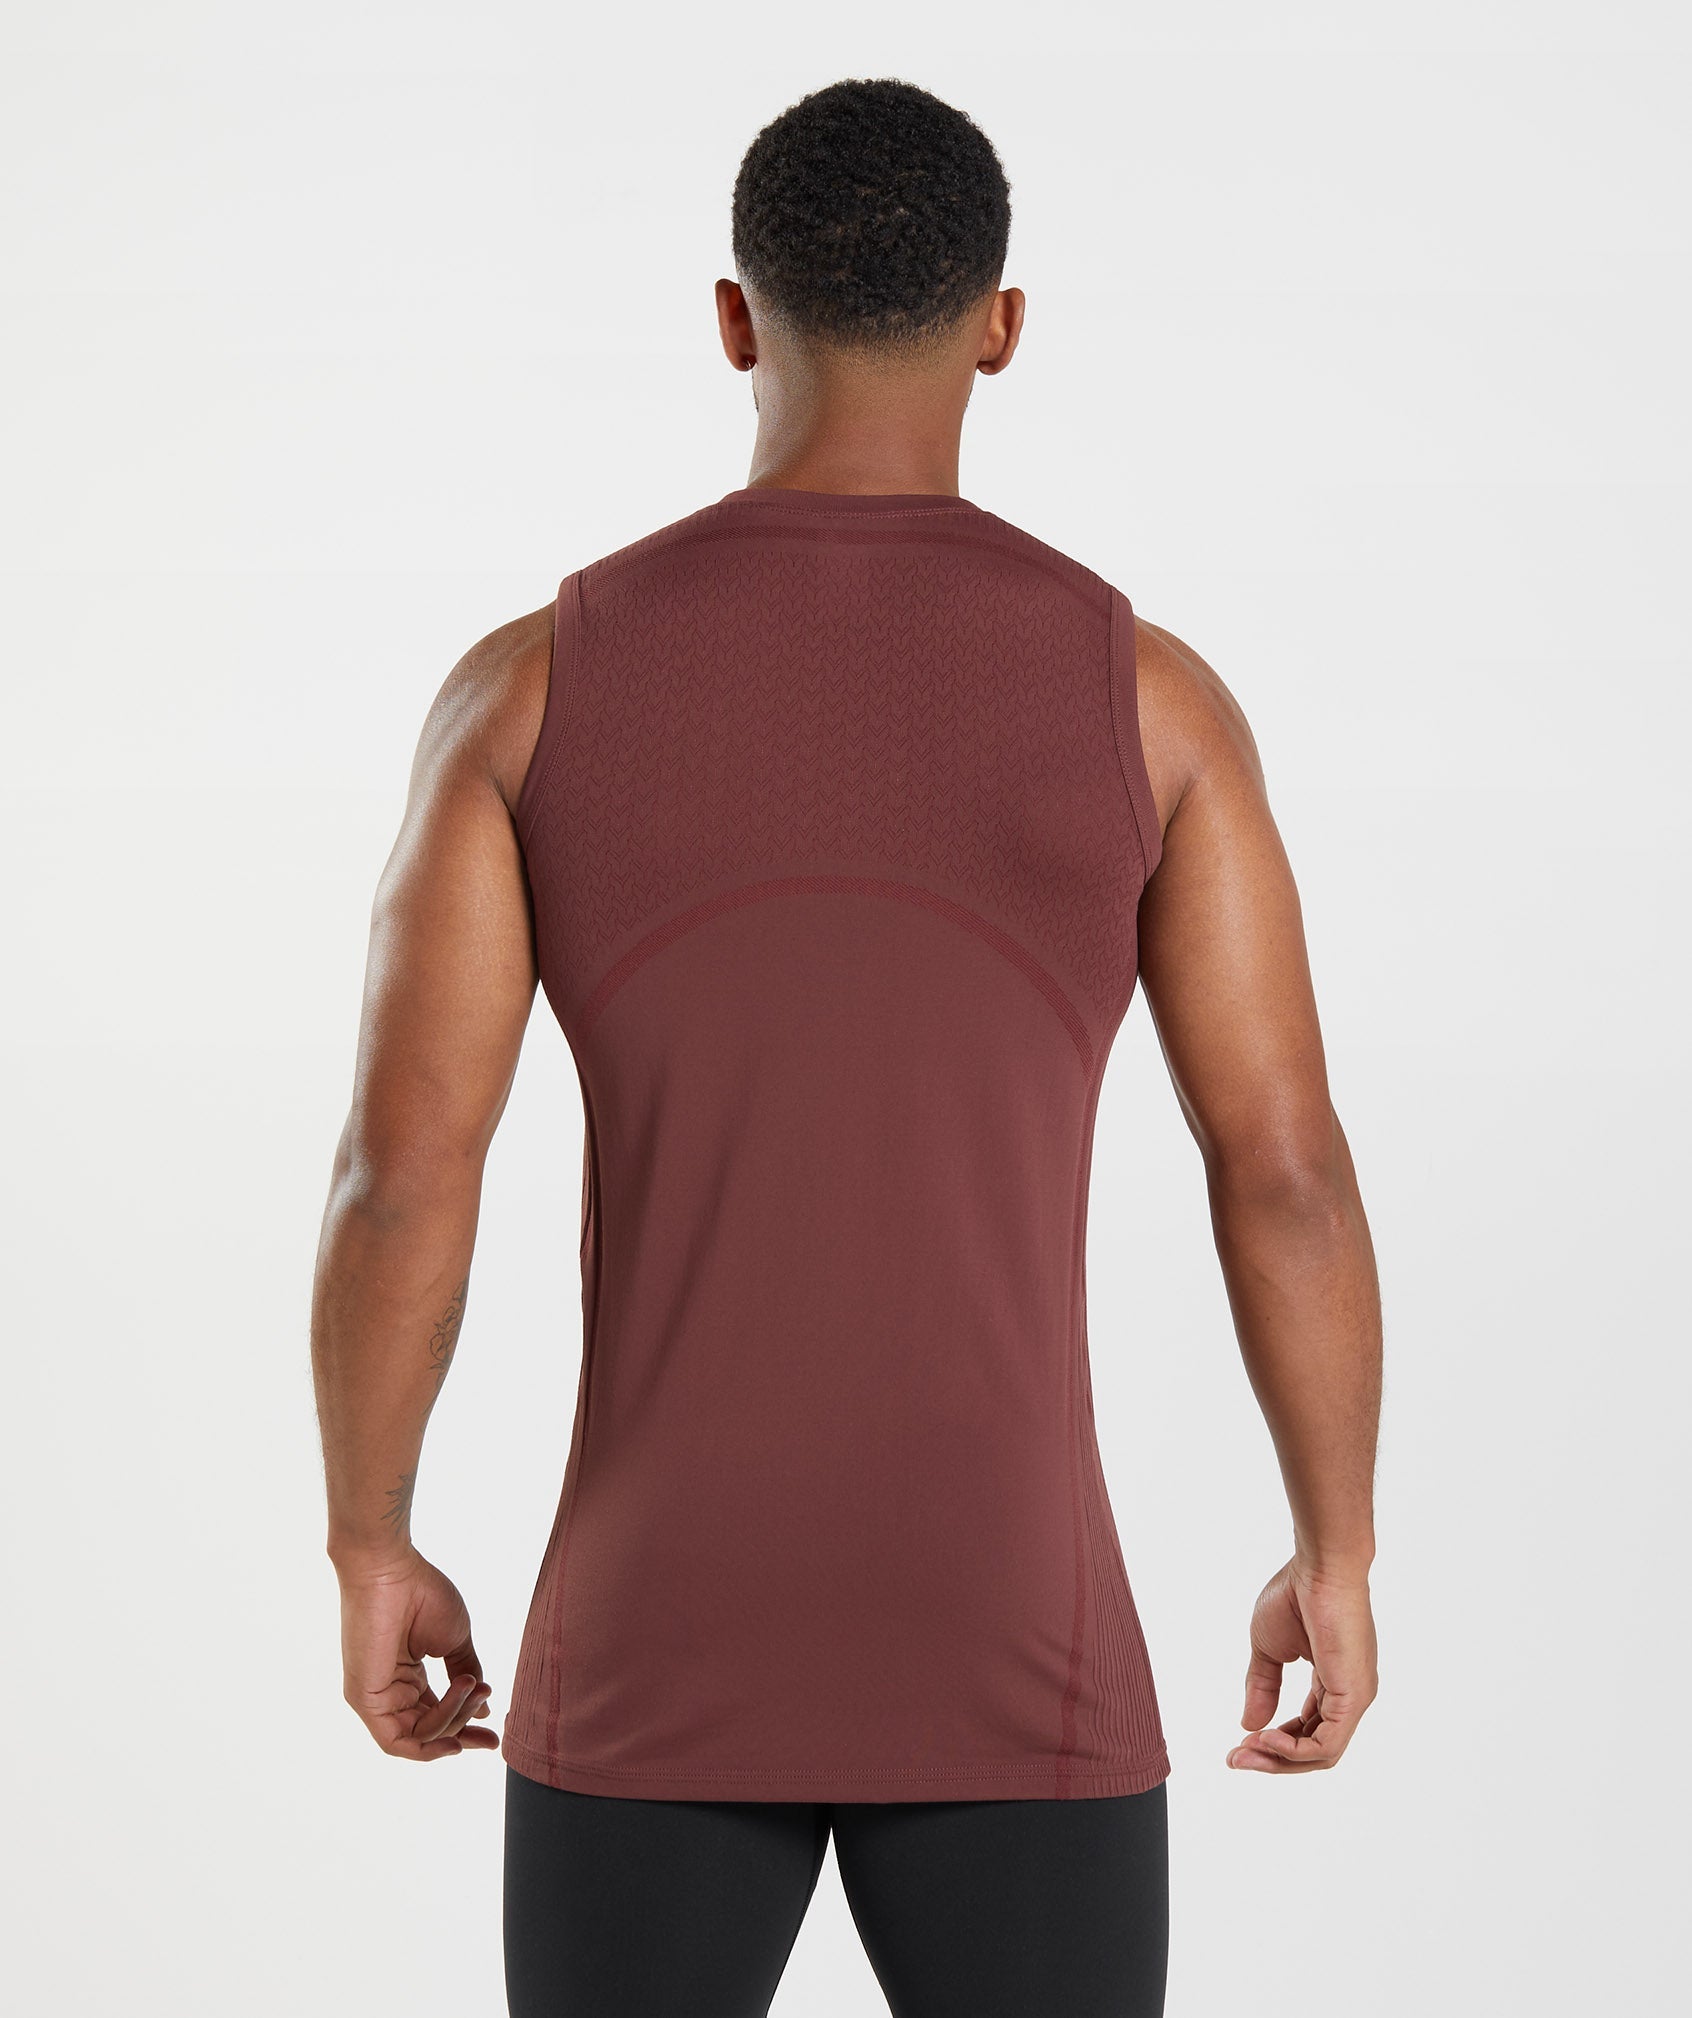 315 Seamless Tank in Cherry Brown - view 2